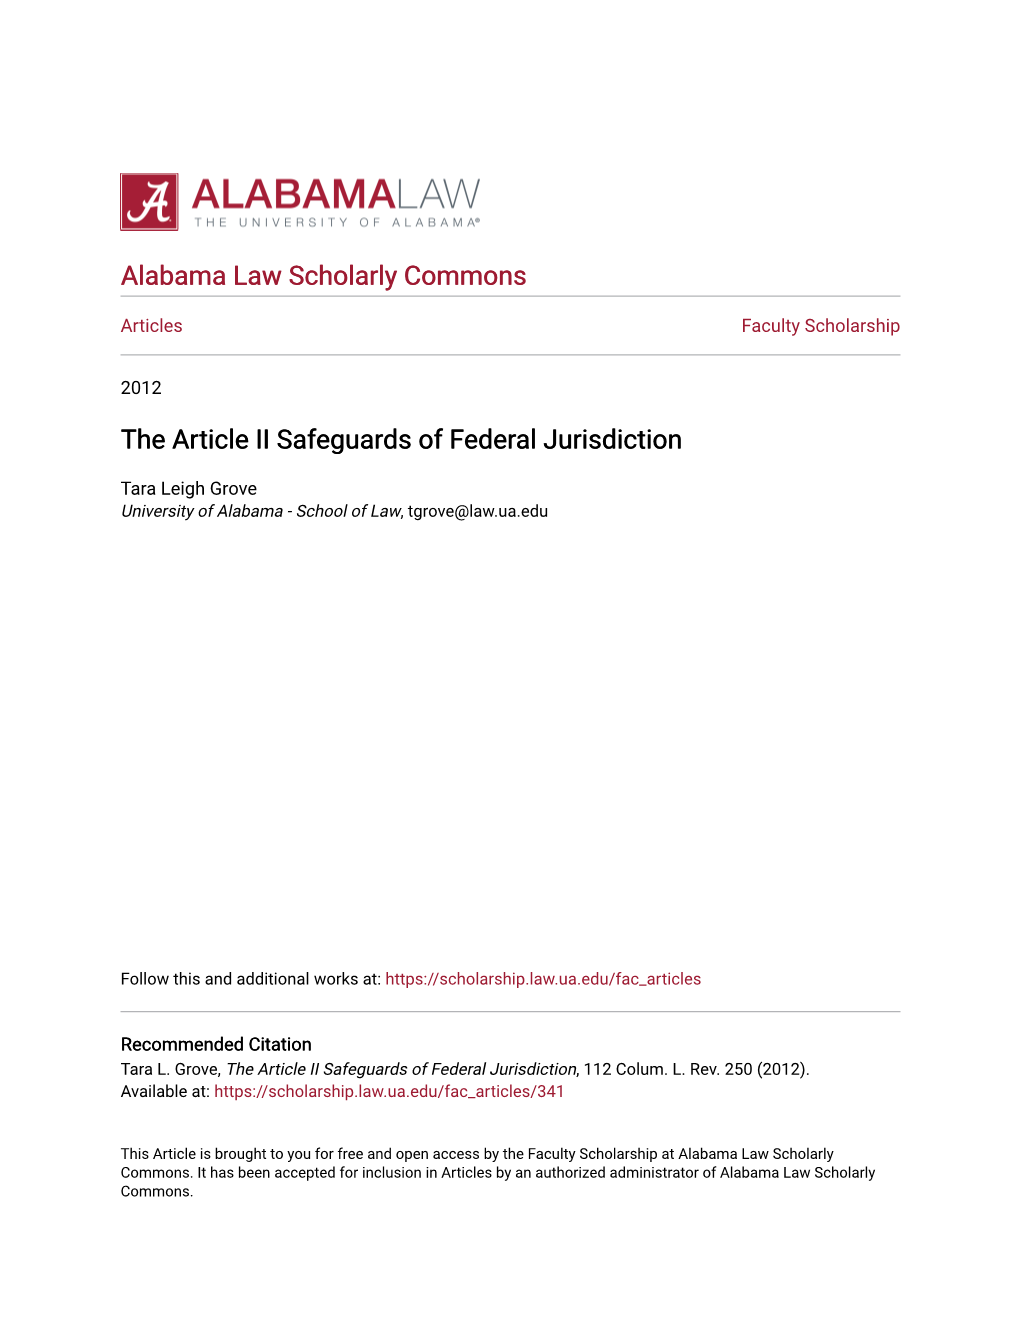 The Article II Safeguards of Federal Jurisdiction